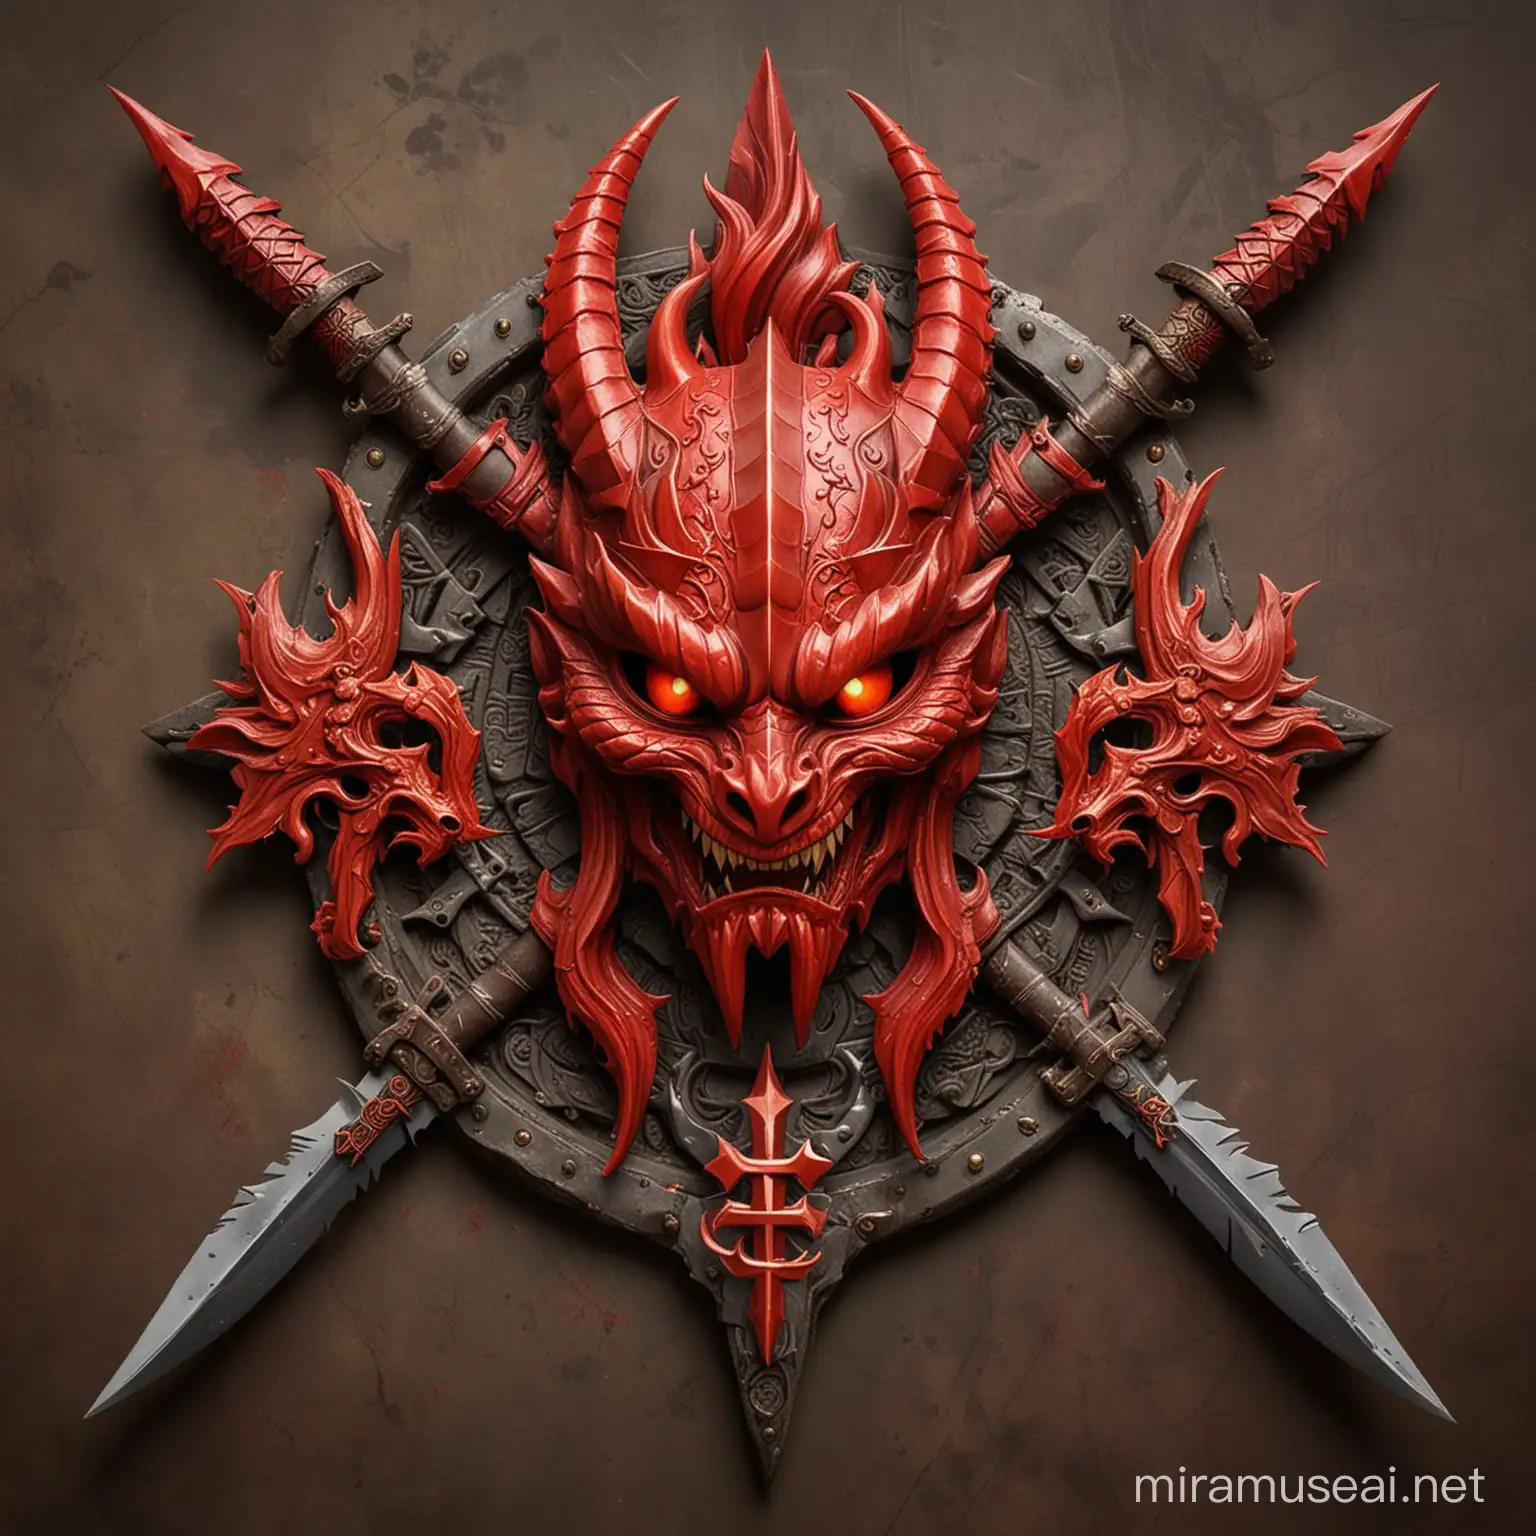 Stylish Red Dragon Head Insignia with Crossed Blades and Flames